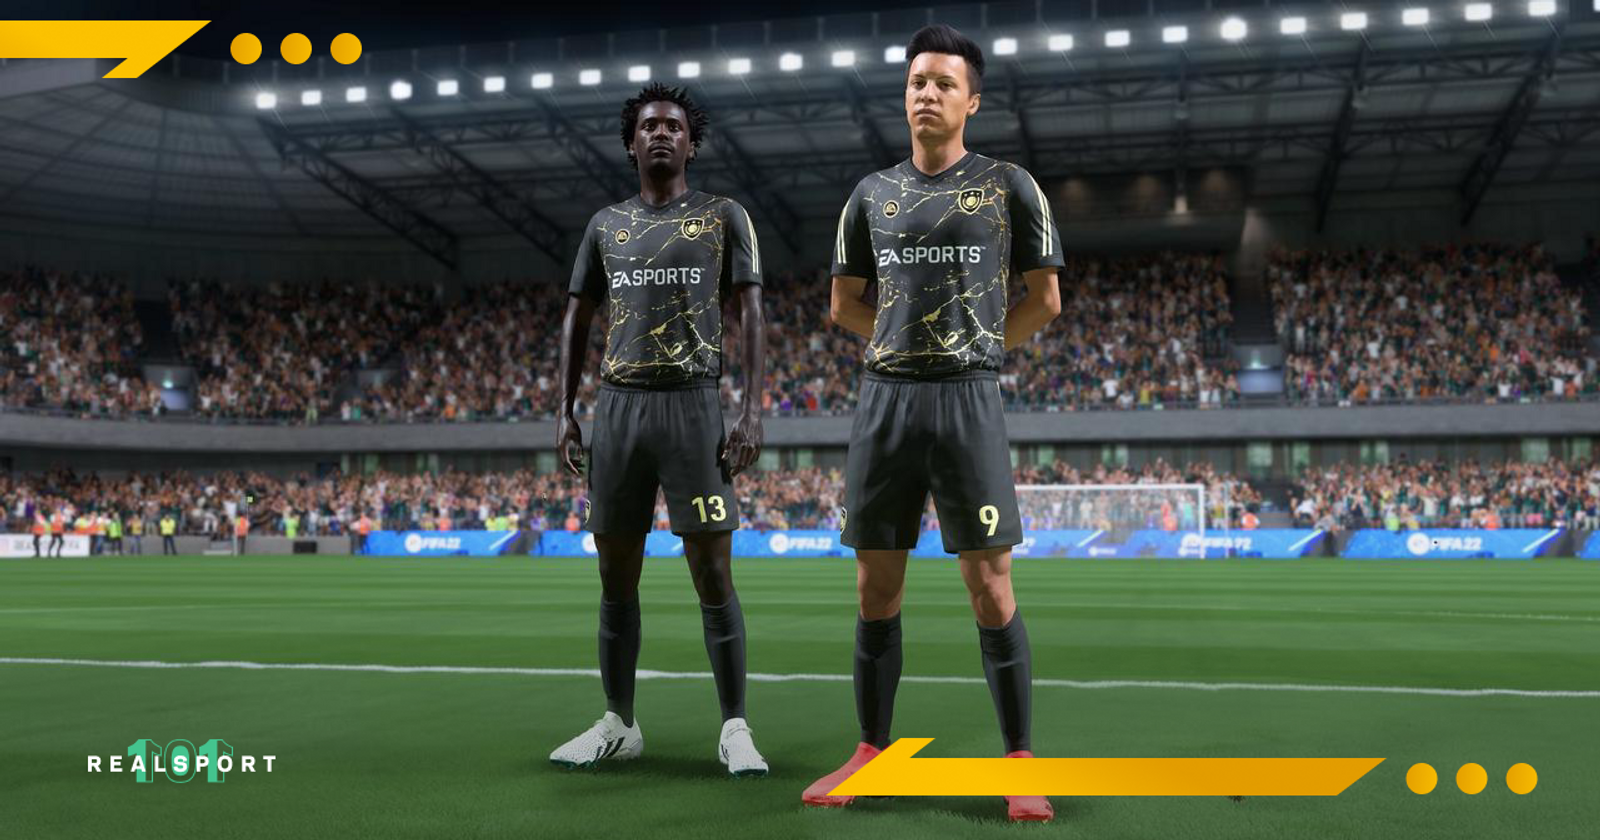 EA Sports FC aims to “blur the lines” between virtual and real soccer